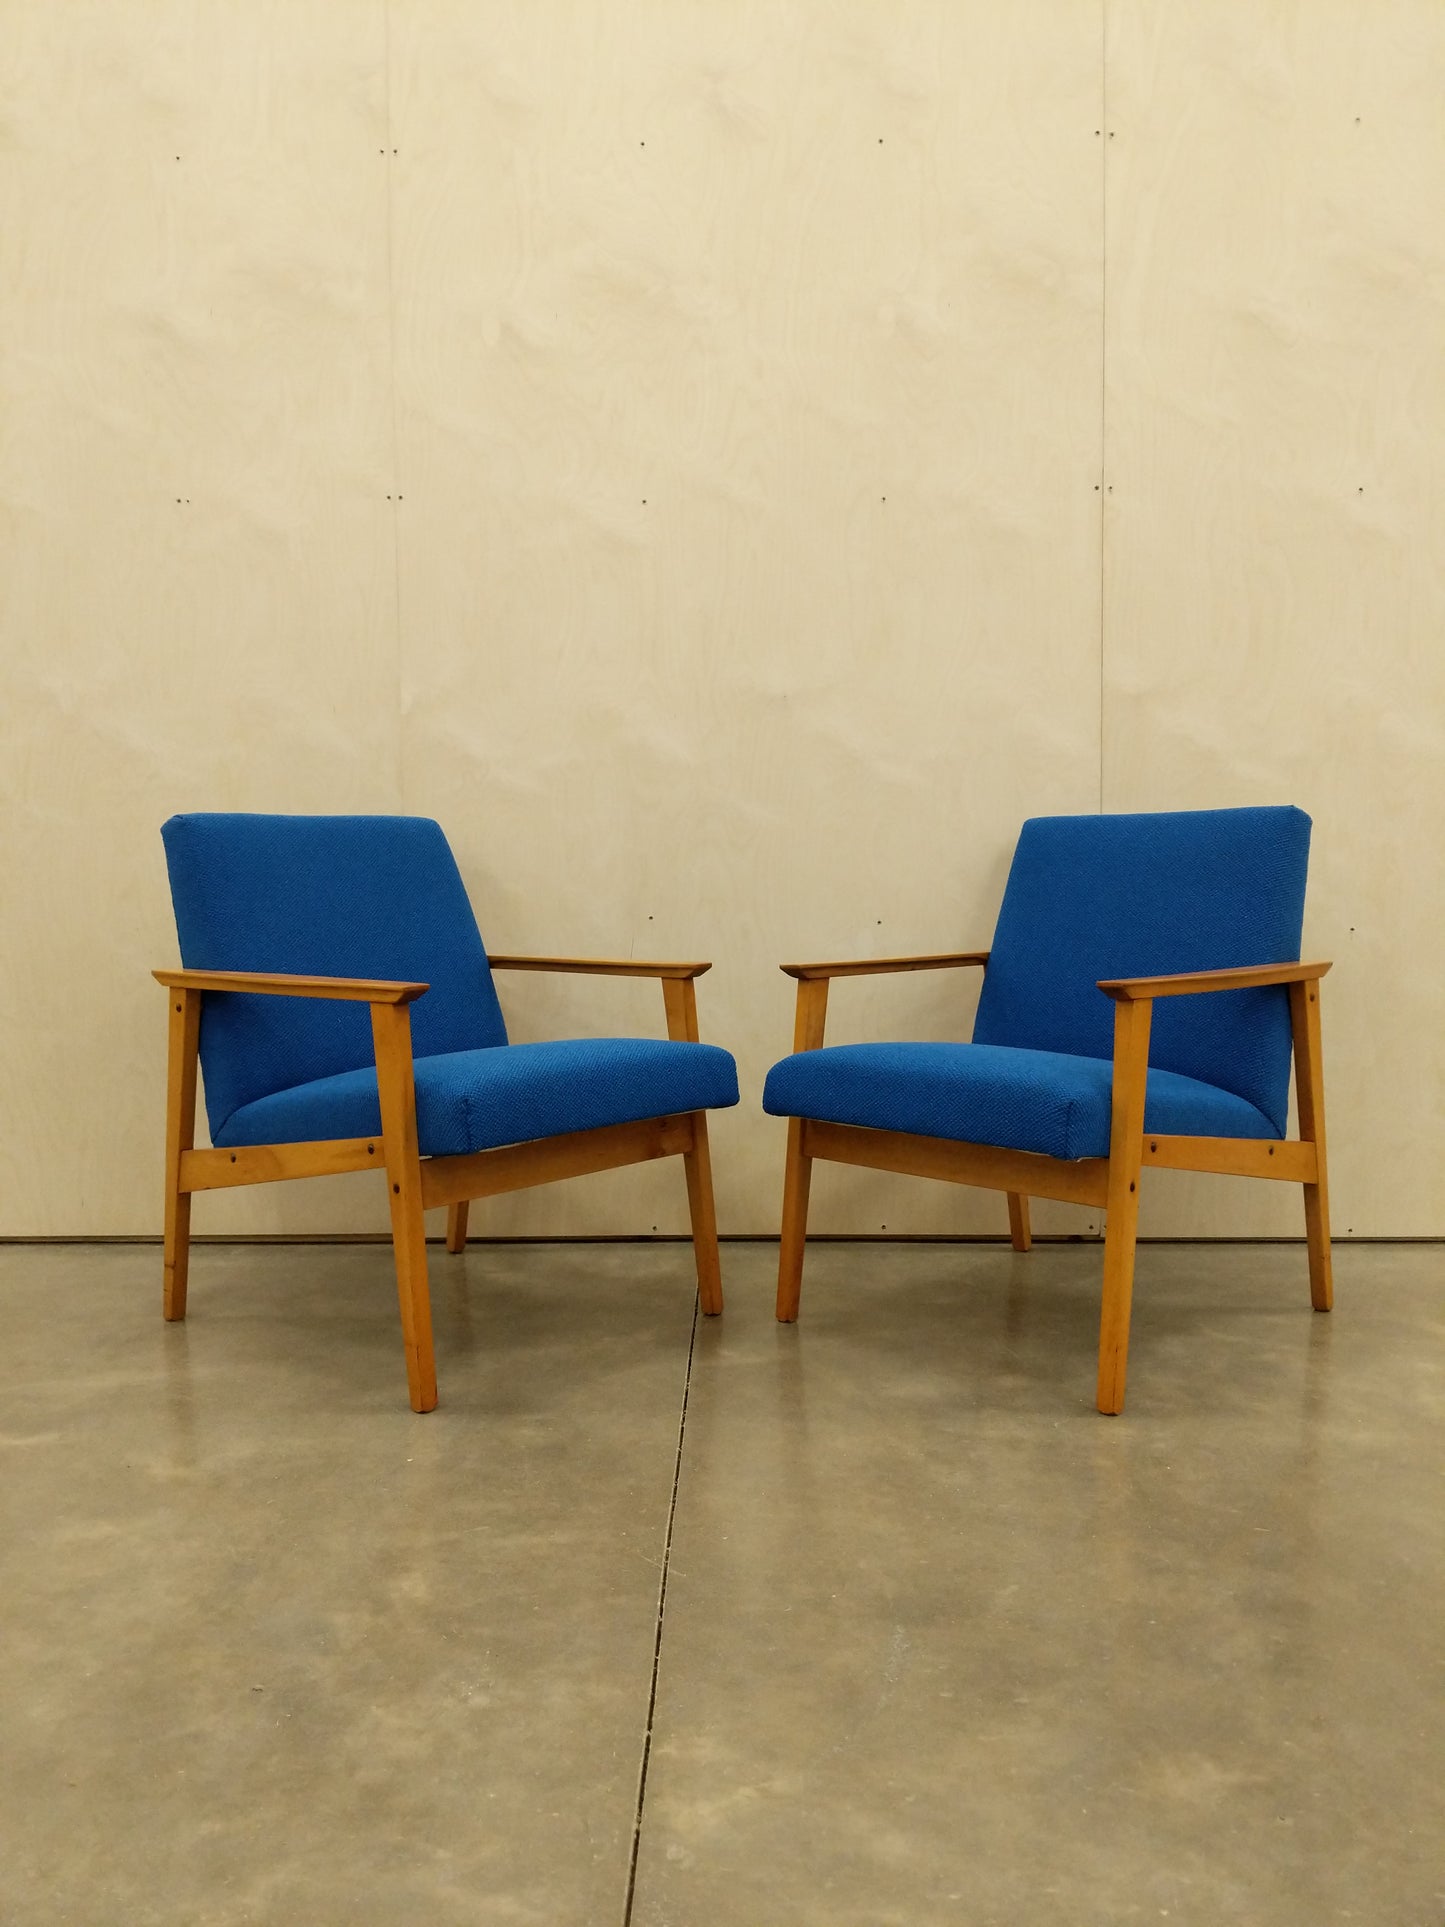 Pair of Vintage Czech Lounge Chairs